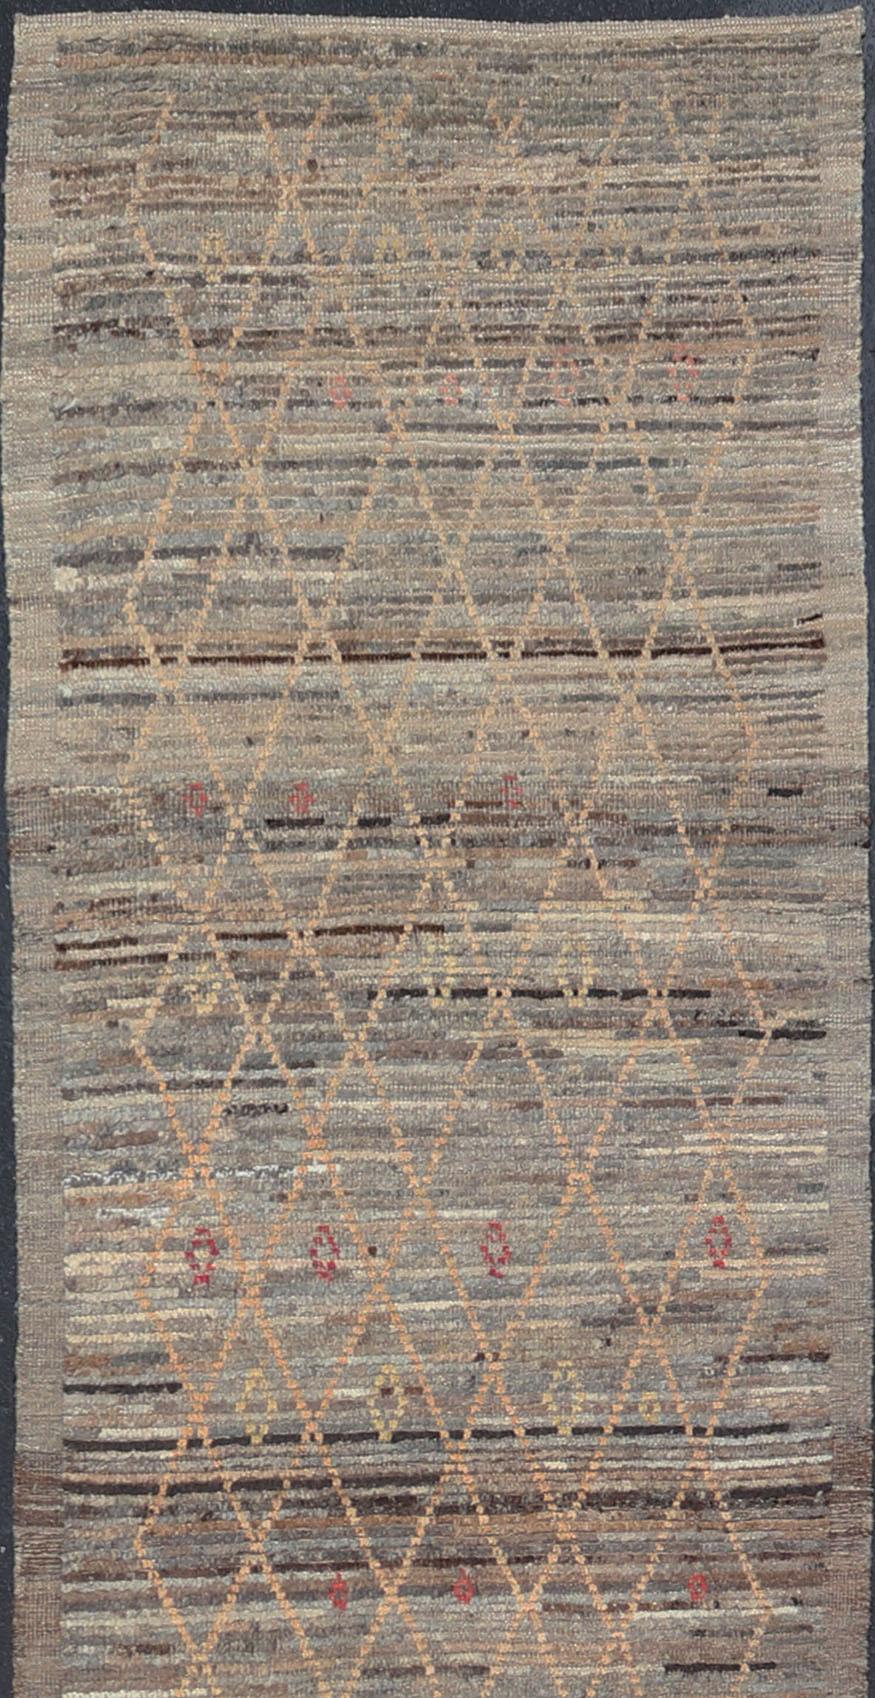 Gray background with gold and red highlights in tribal design and free-flowing Moroccan design, Keivan Woven Arts / rug AFG-36109, country of origin / type: Afghanistan / piled

The geometric design of this rug makes it great option for modern and